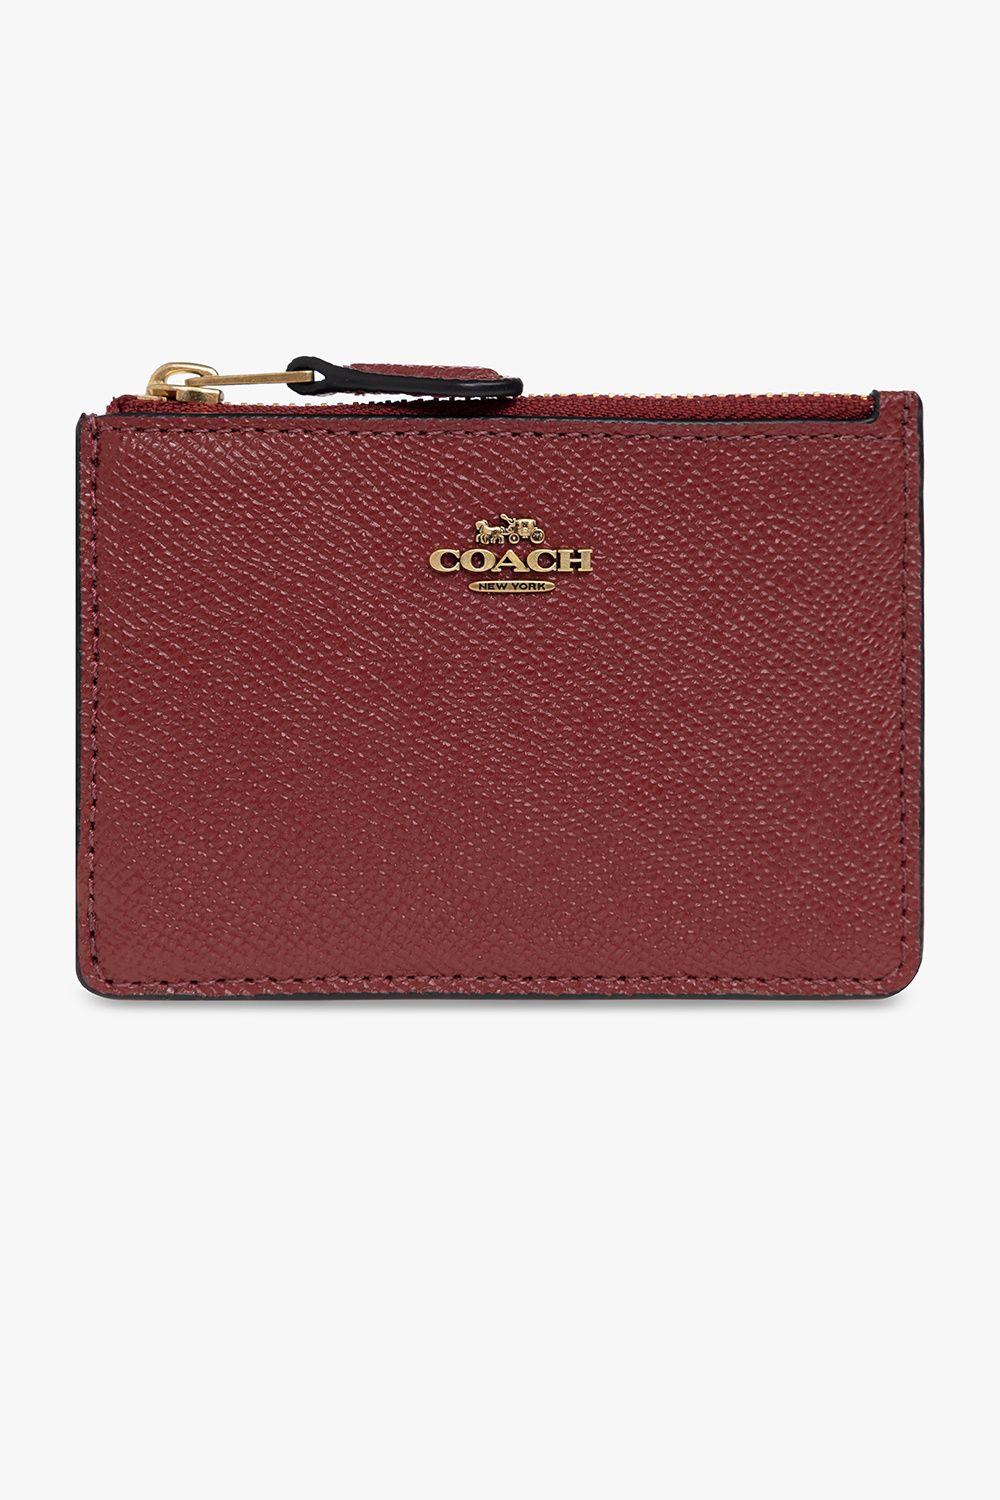 COACH Leather Card Case in Red